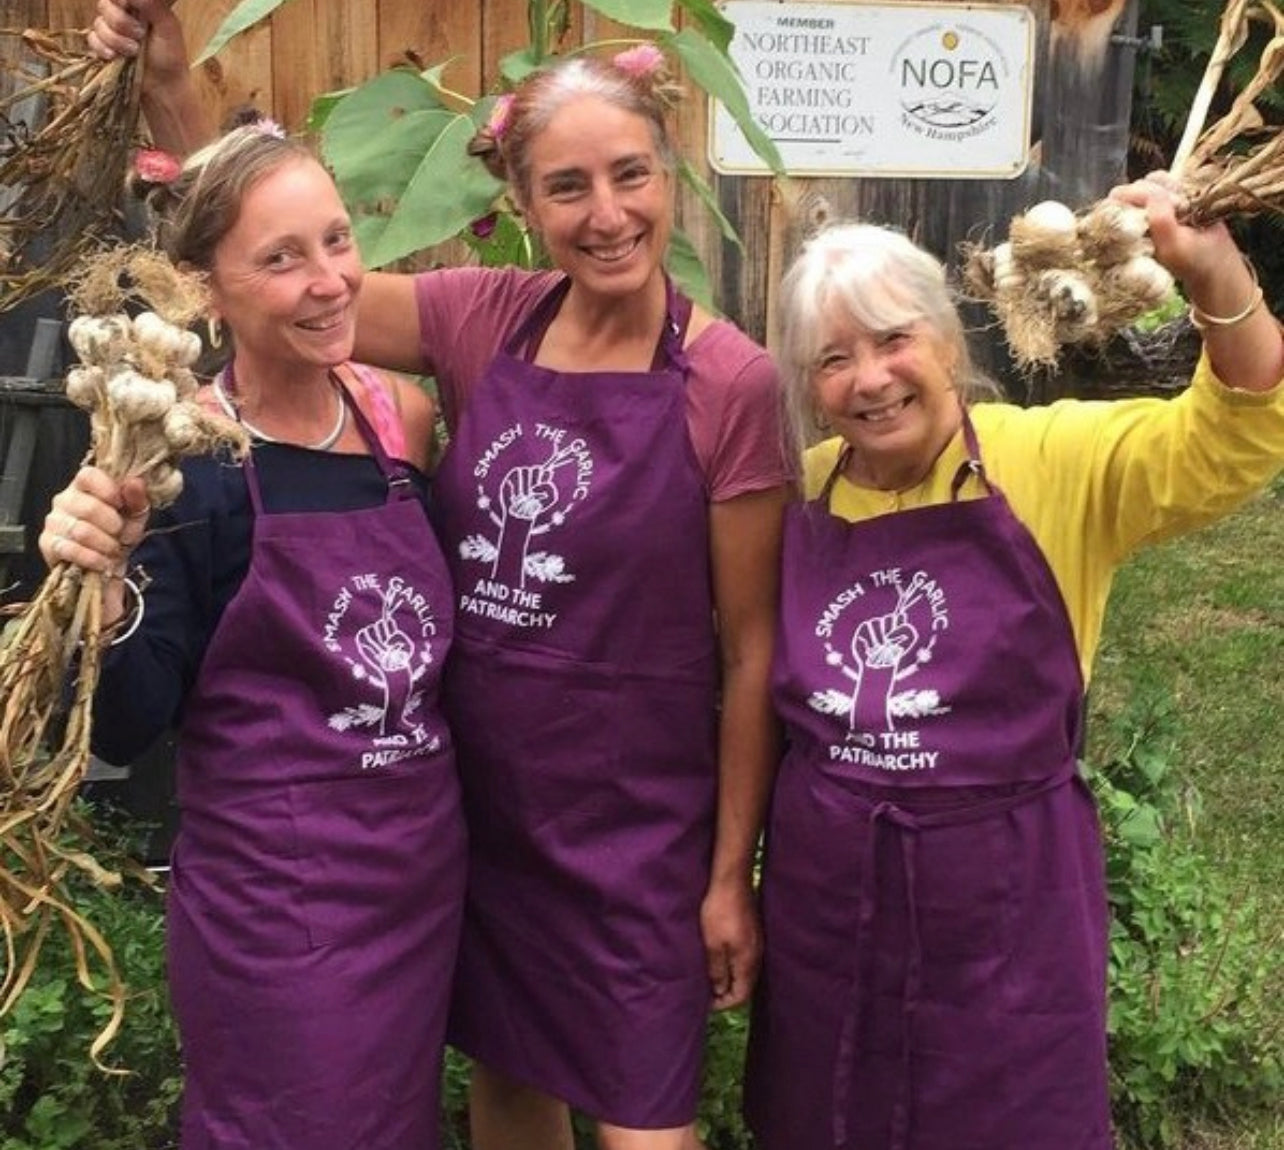 Three women wear purple "Smash the Garlic and the Patriarchy" aprons and hold bunches of garlic